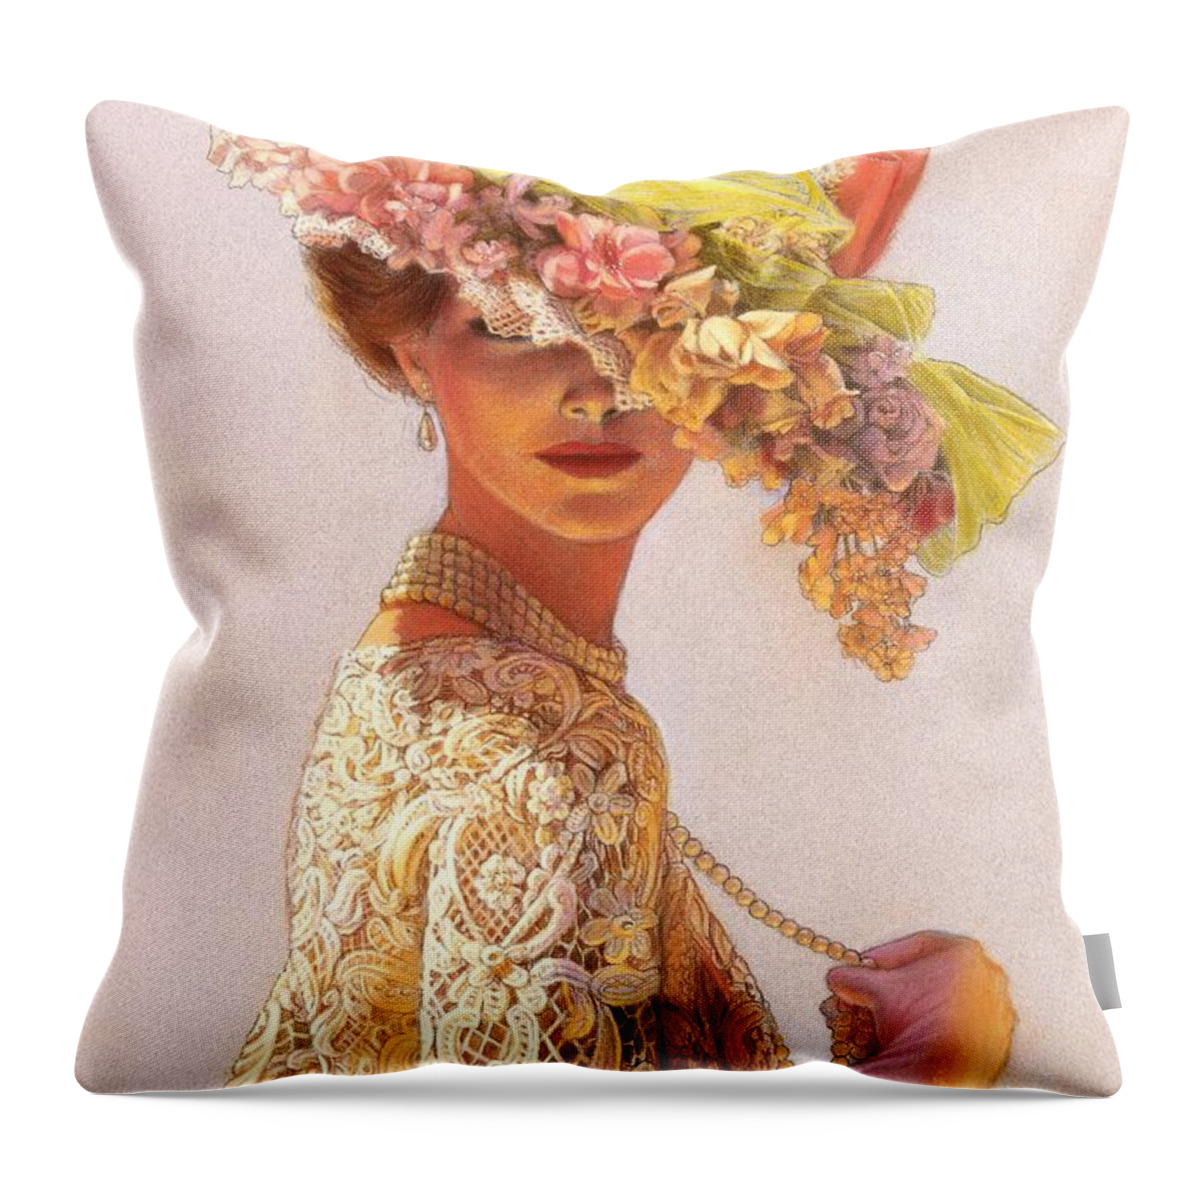 Portrait Throw Pillow featuring the painting Lady Victoria Victorian Elegance by Sue Halstenberg